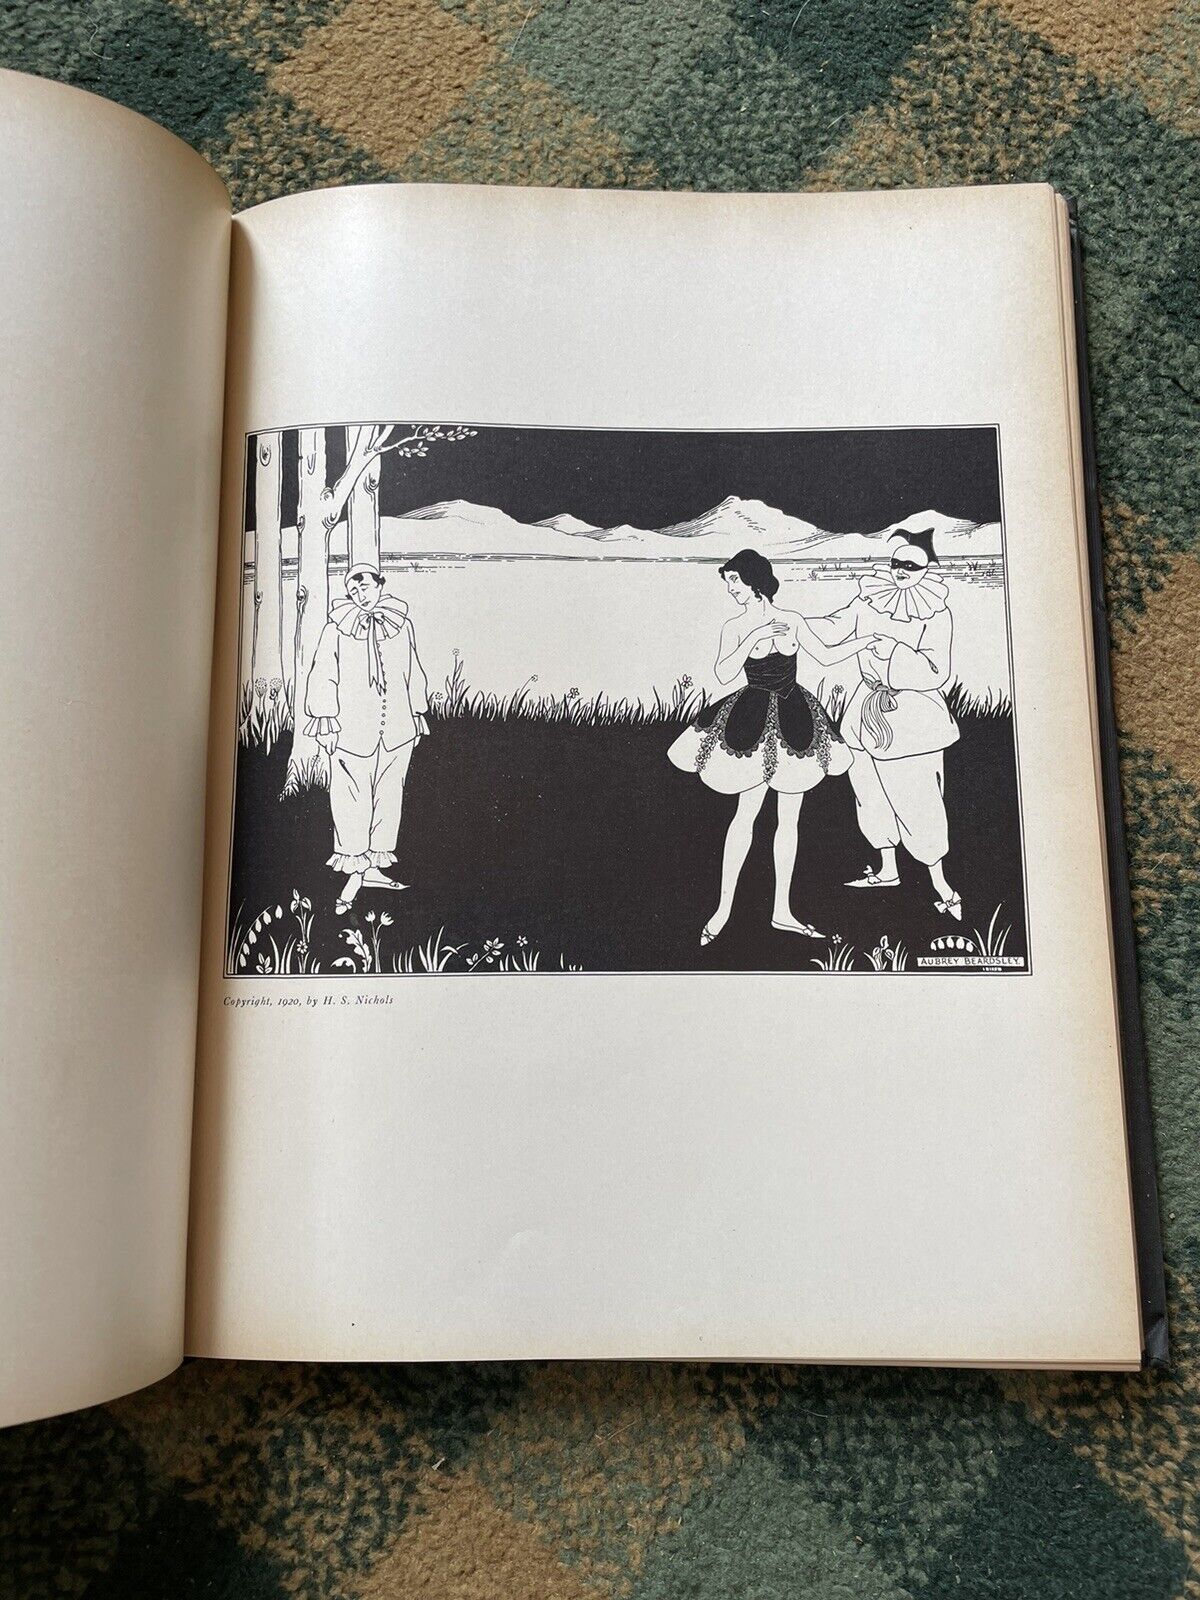 Fifty Drawings by Aubrey Beardsley Selected from the Collection Owned by Mr. H. S. Nichols : Ltd Edition 1920